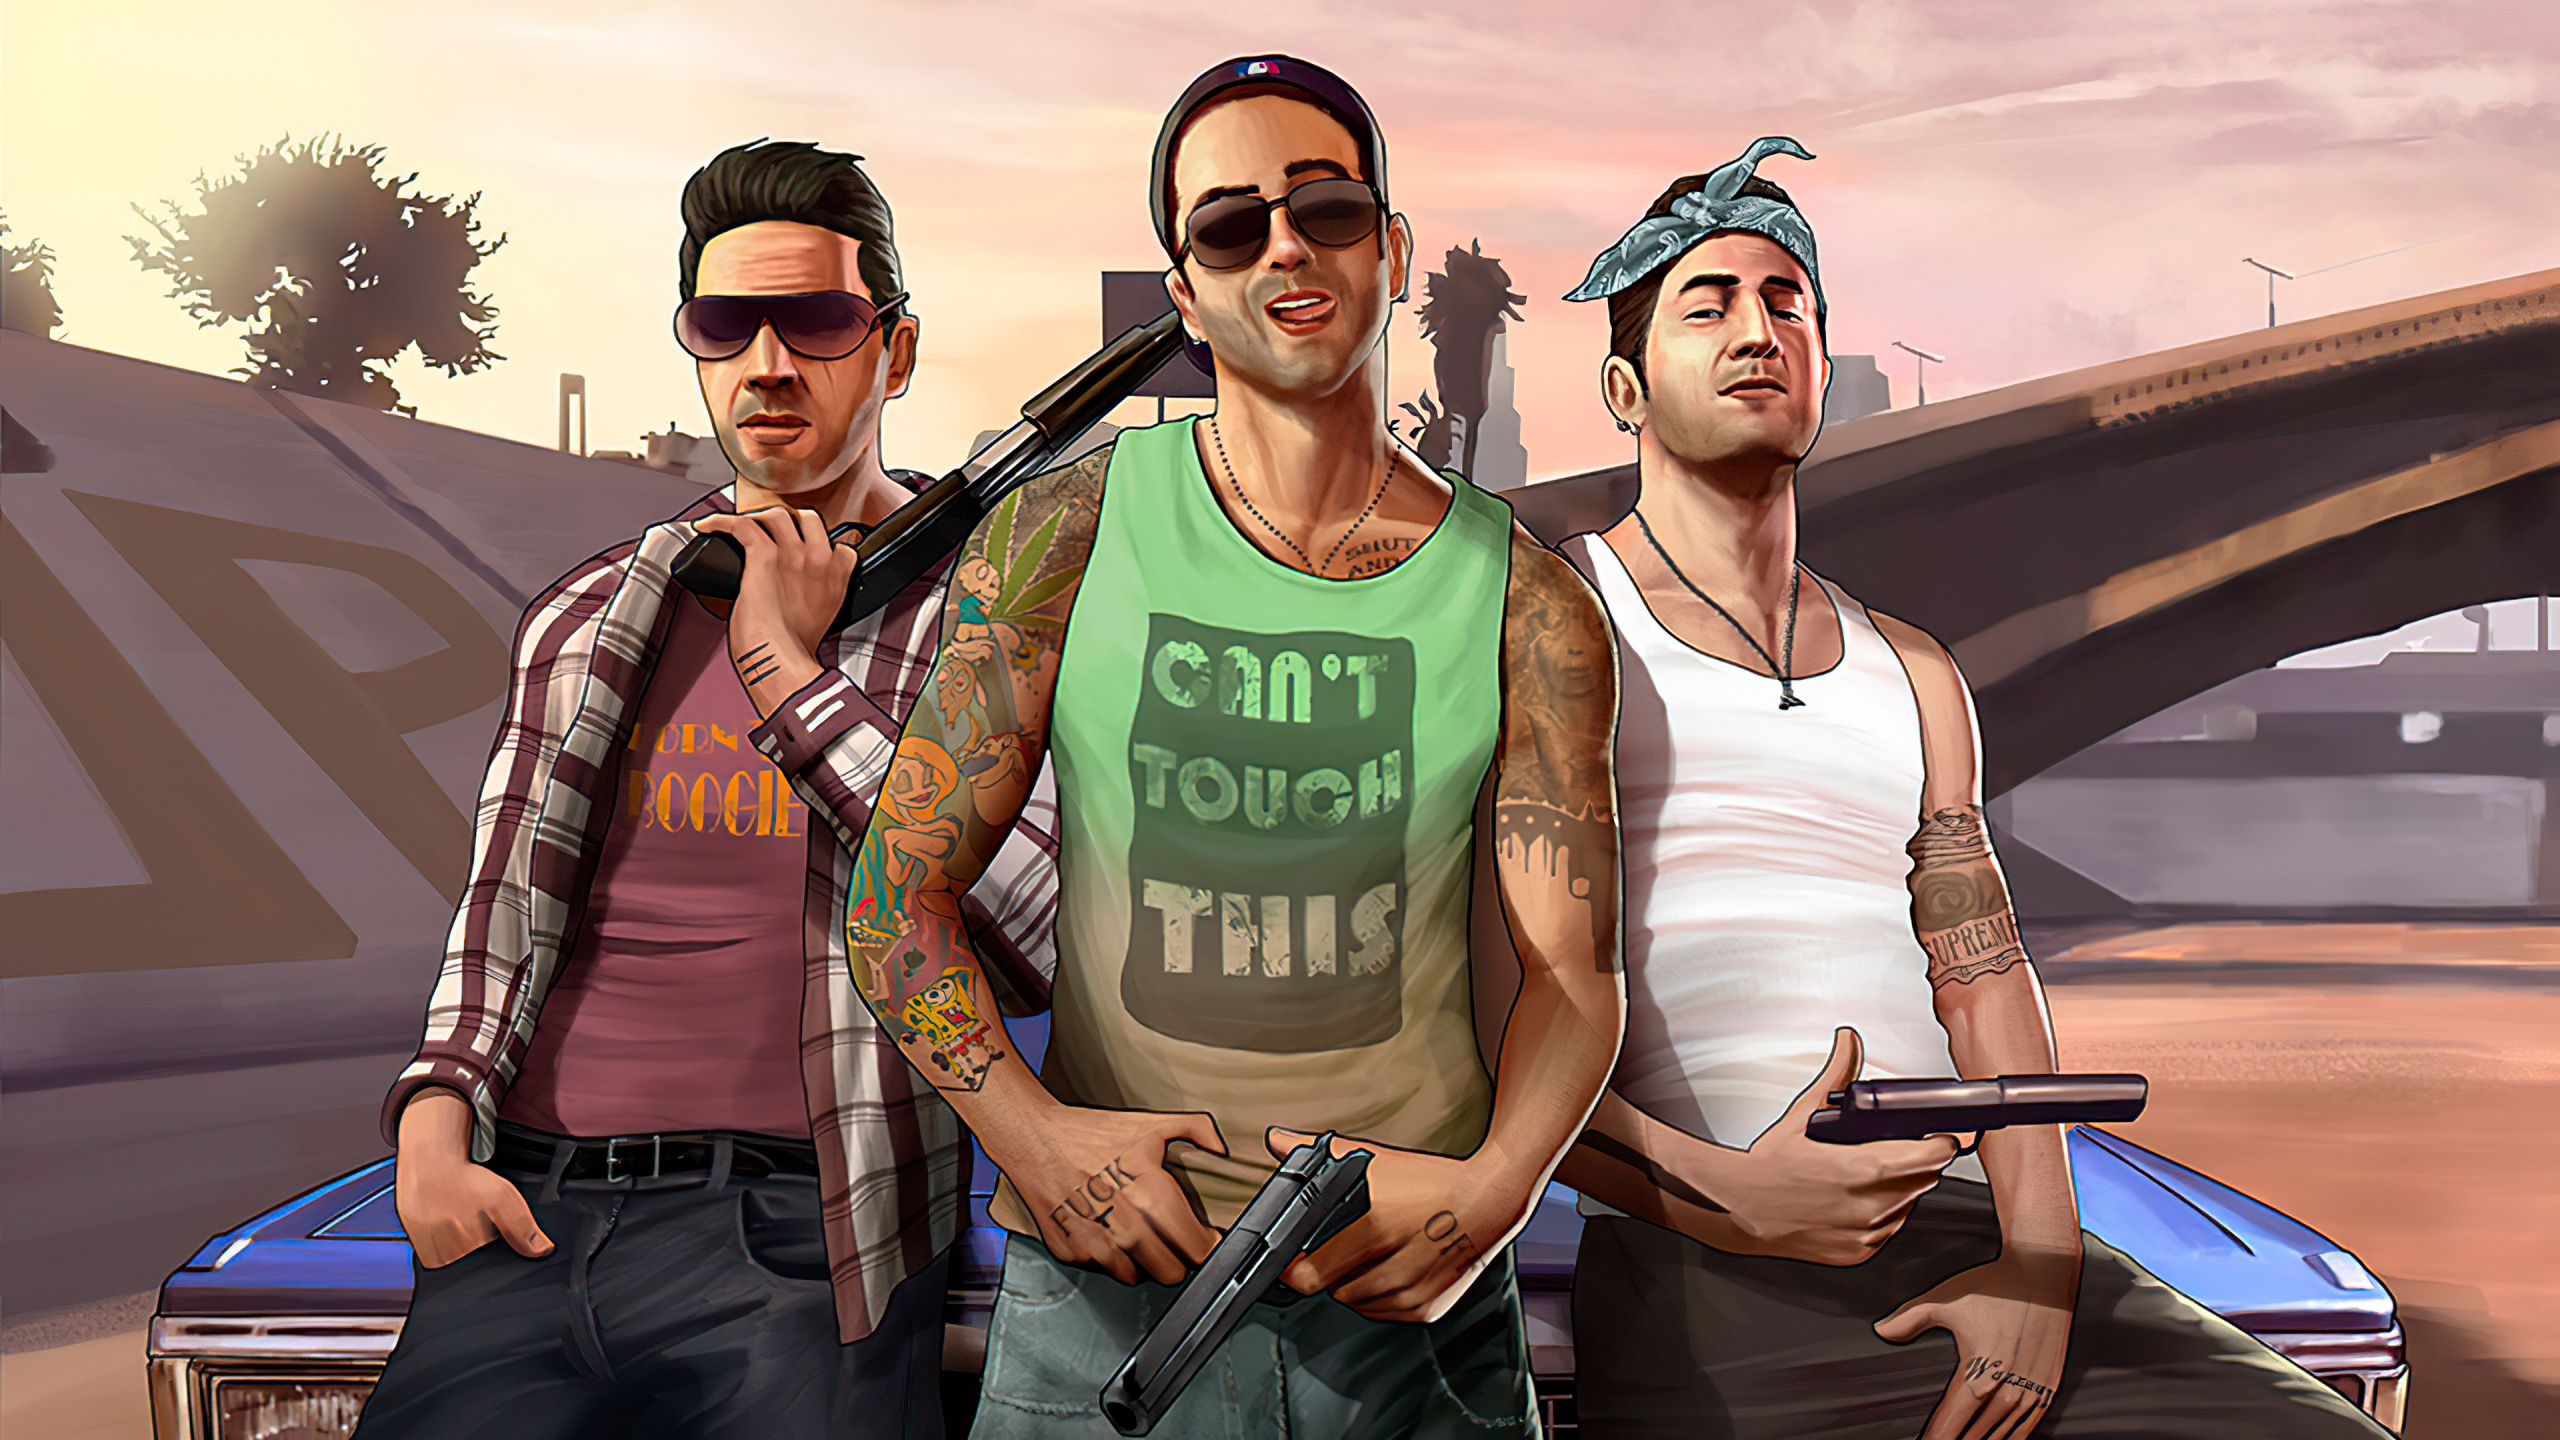 Chillin With The Homies, Grand Theft Auto v, Rockstar Games, Human, Eyewear. Wallpaper in 2560x1440 Resolution